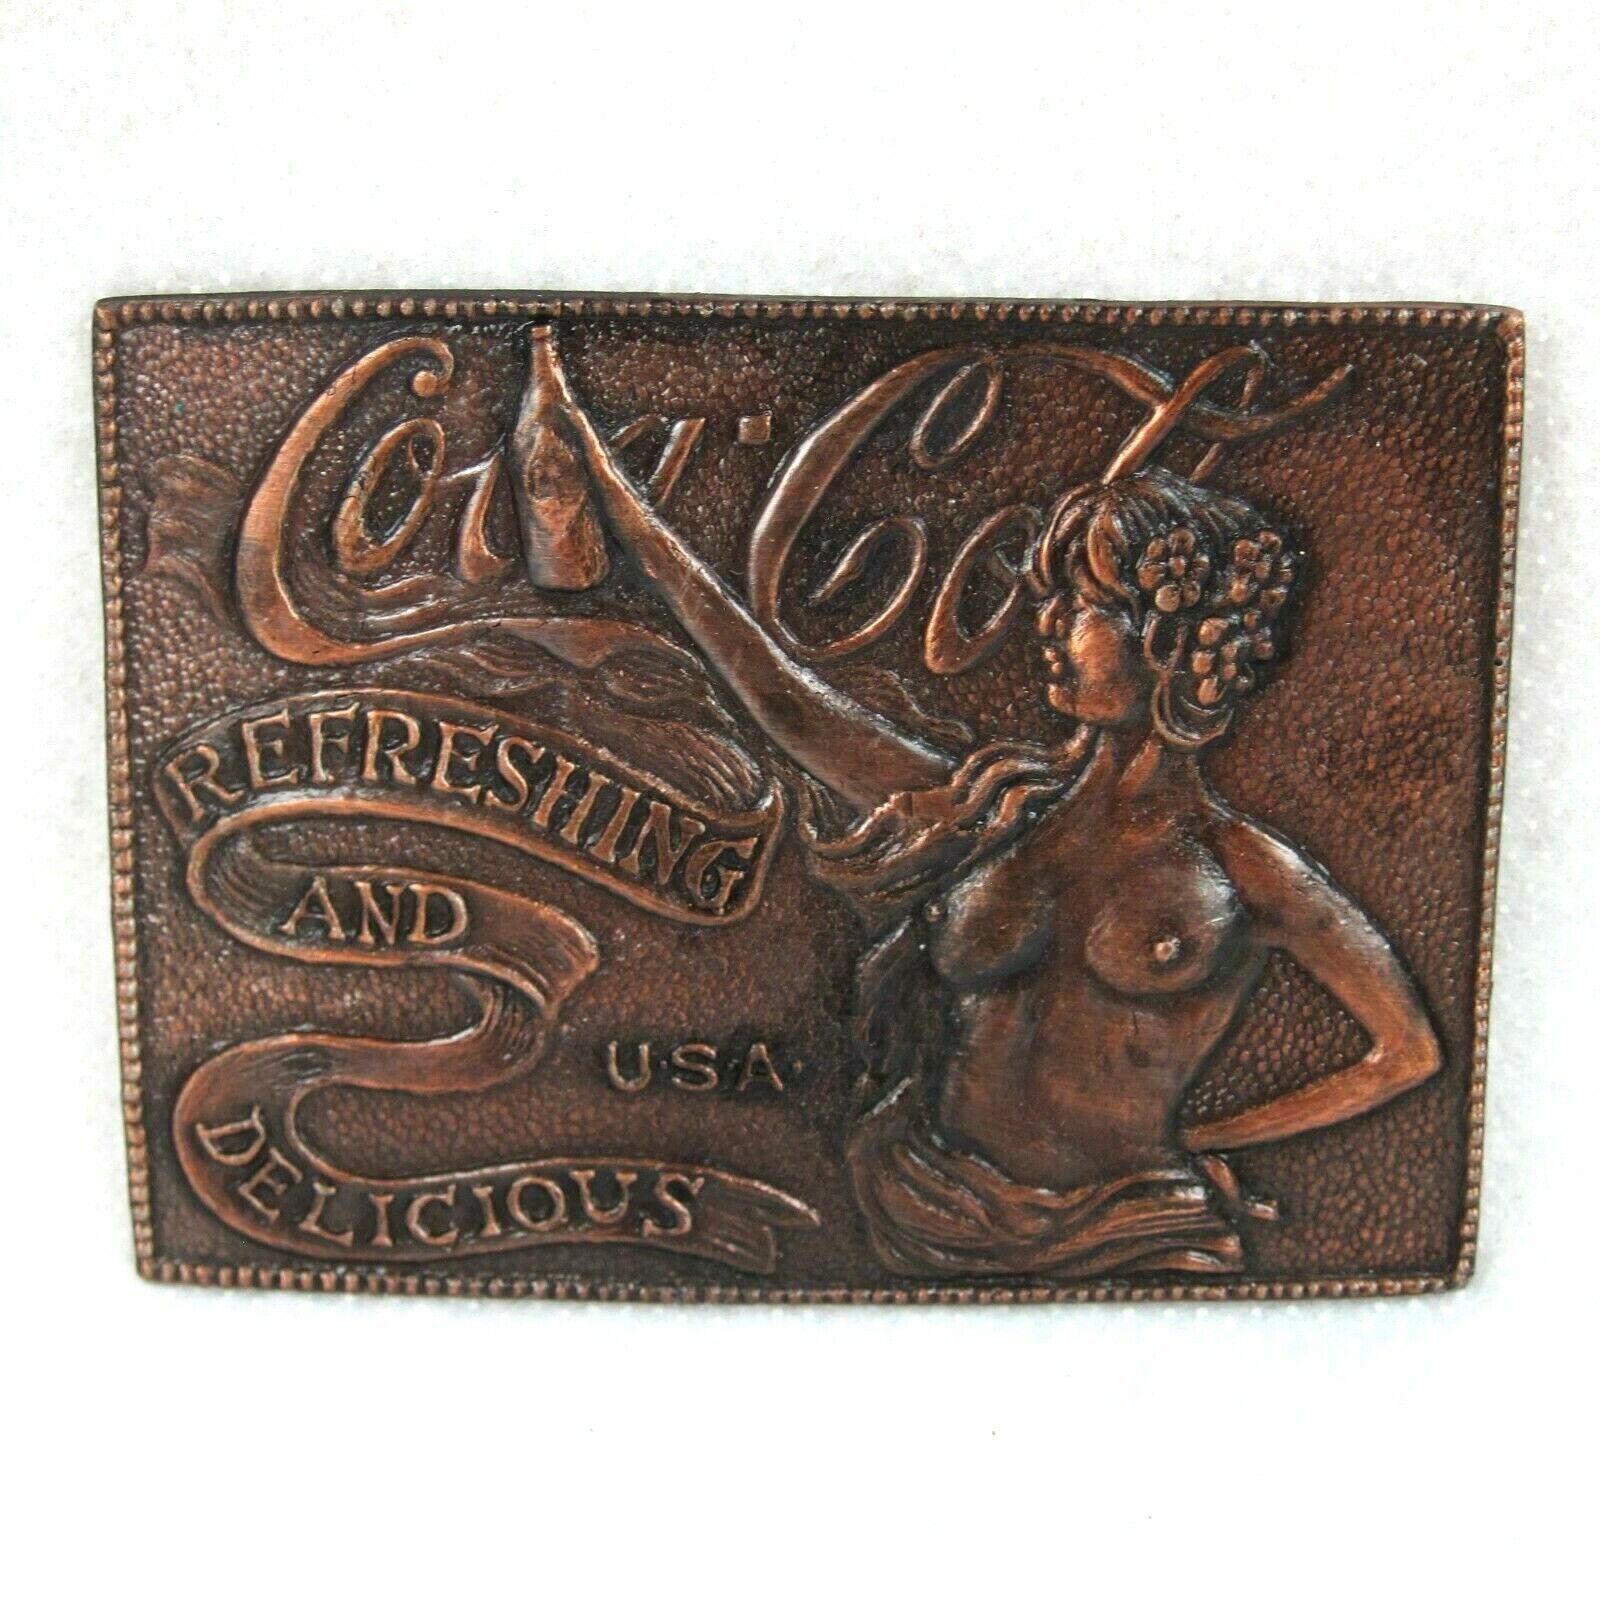 Primary image for Vintage Coca Cola Metal Belt Buckle Pinup Nude Lady Refreshing & Delicious USA